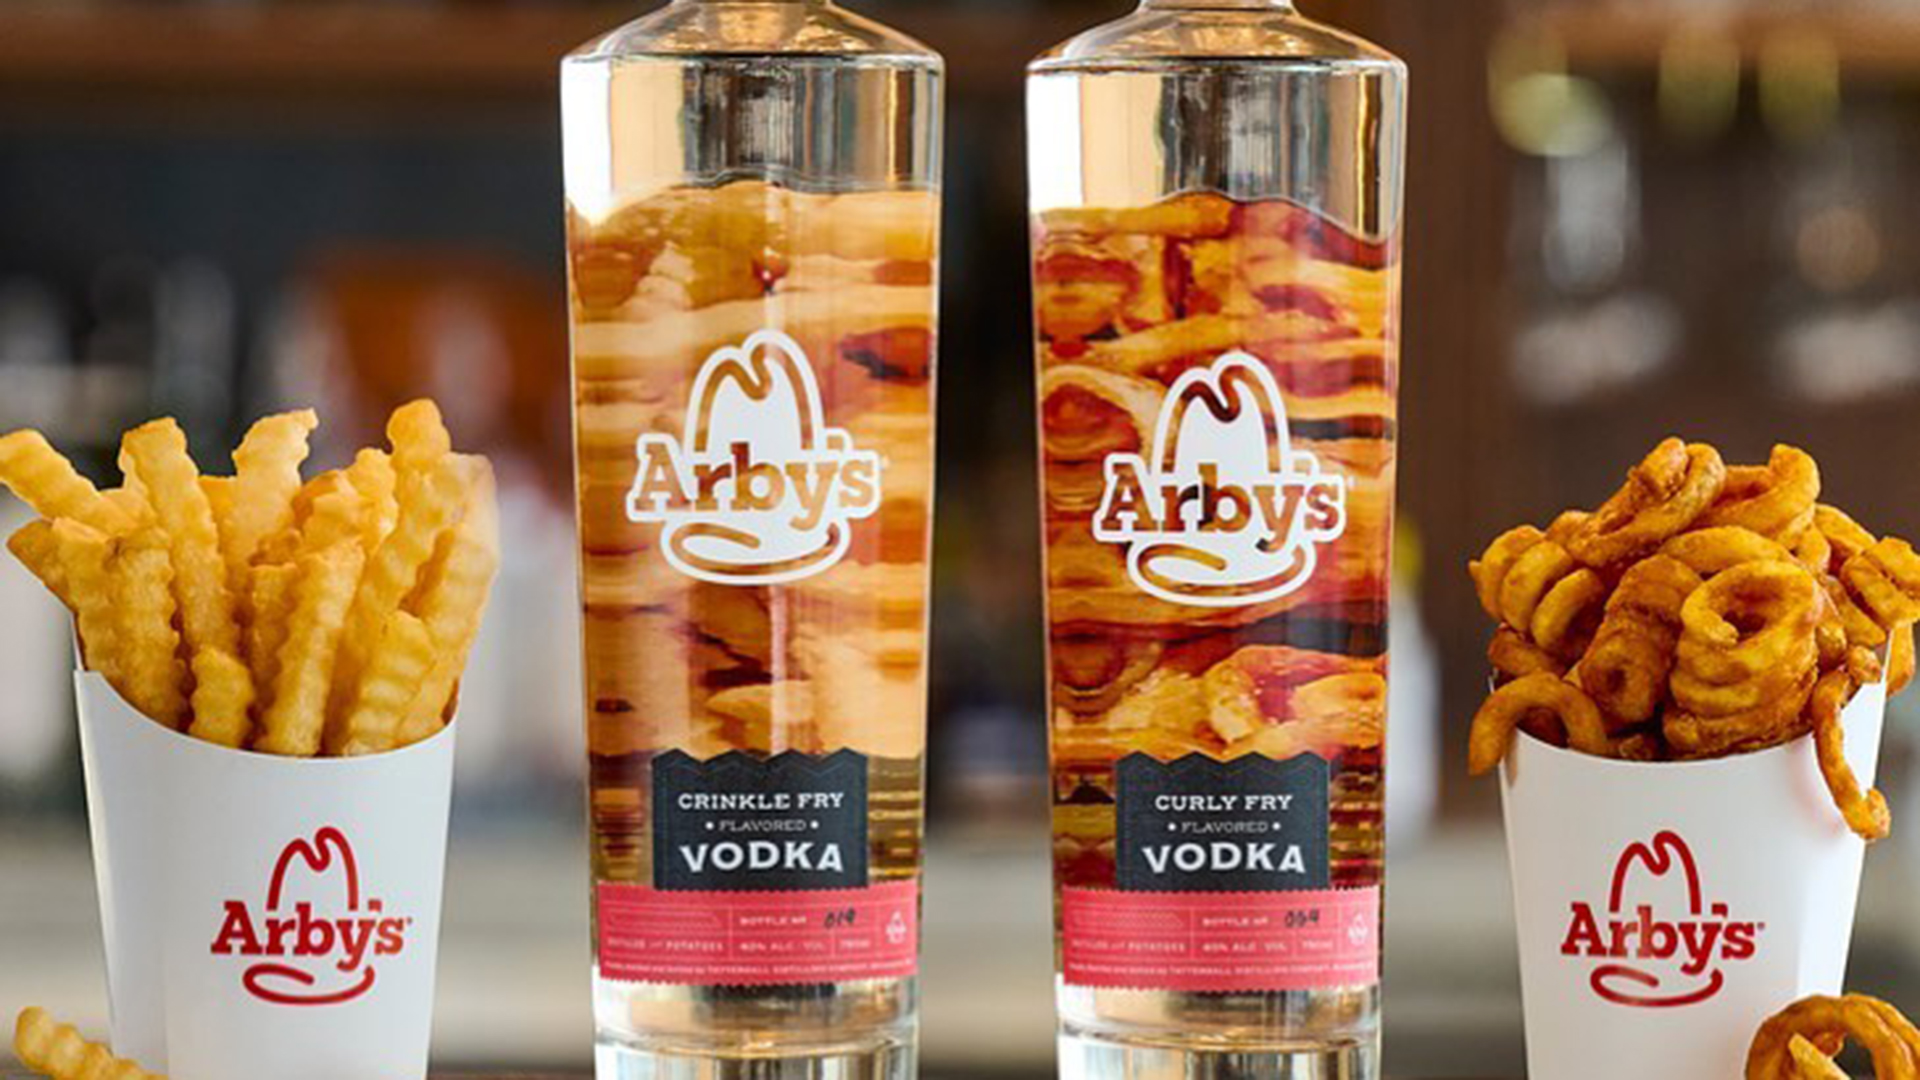 Tattersall’s Puckish, Arby’s Fry-Flavored Vodka Hits Store Shelves … And Promptly Sells Out